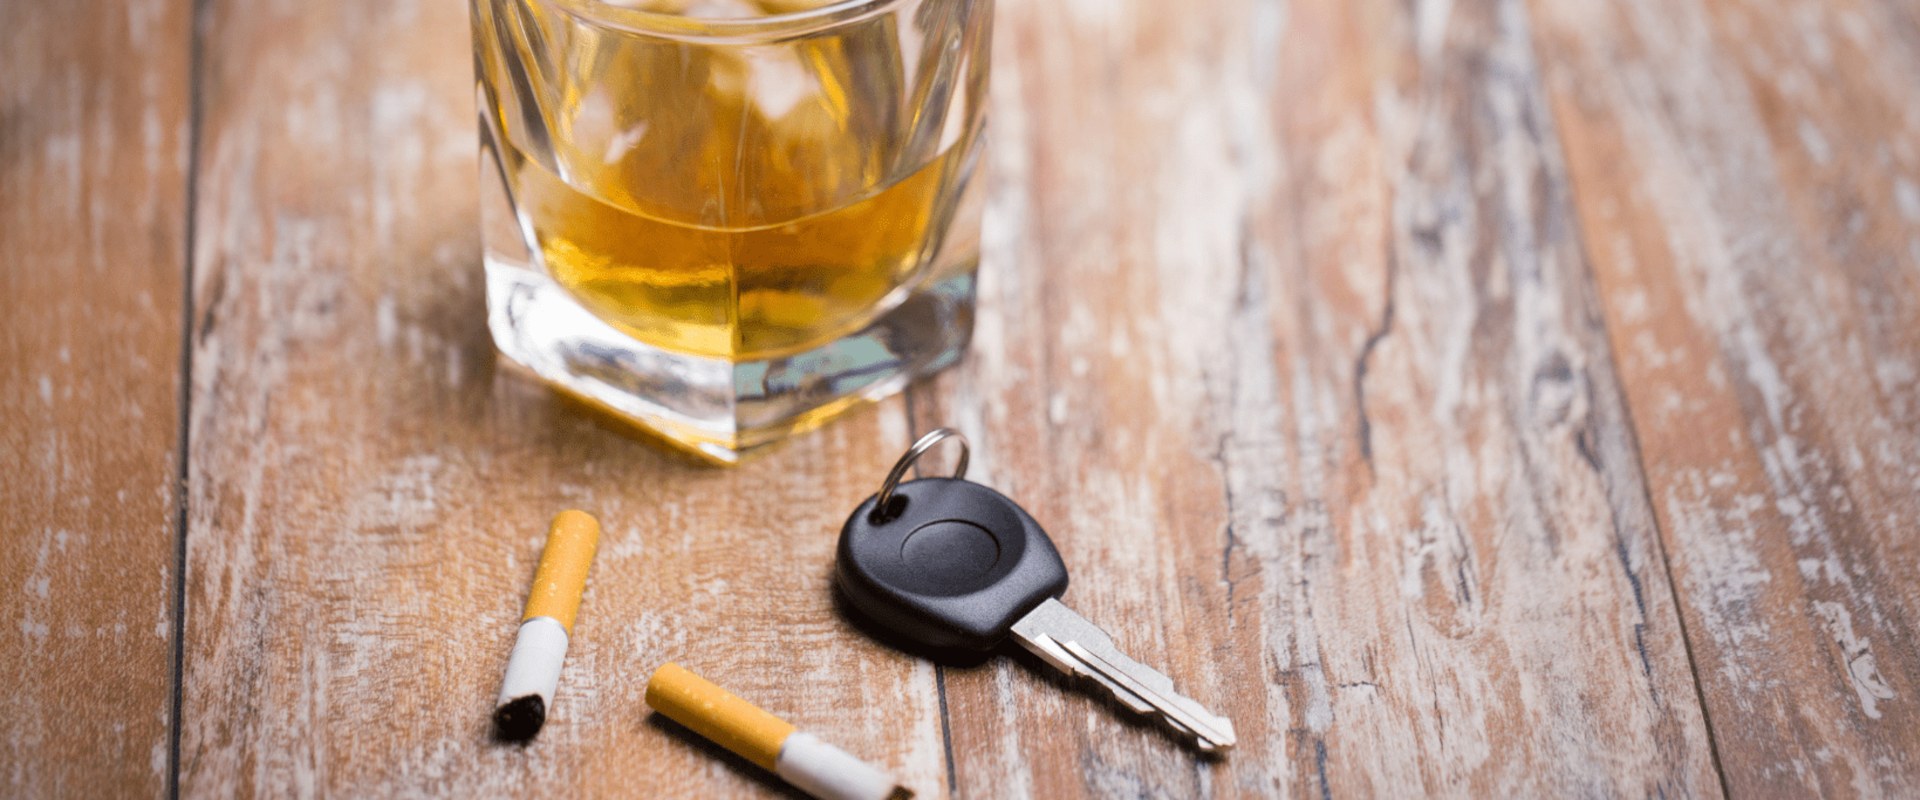 What can a dwi be reduced to in new york?